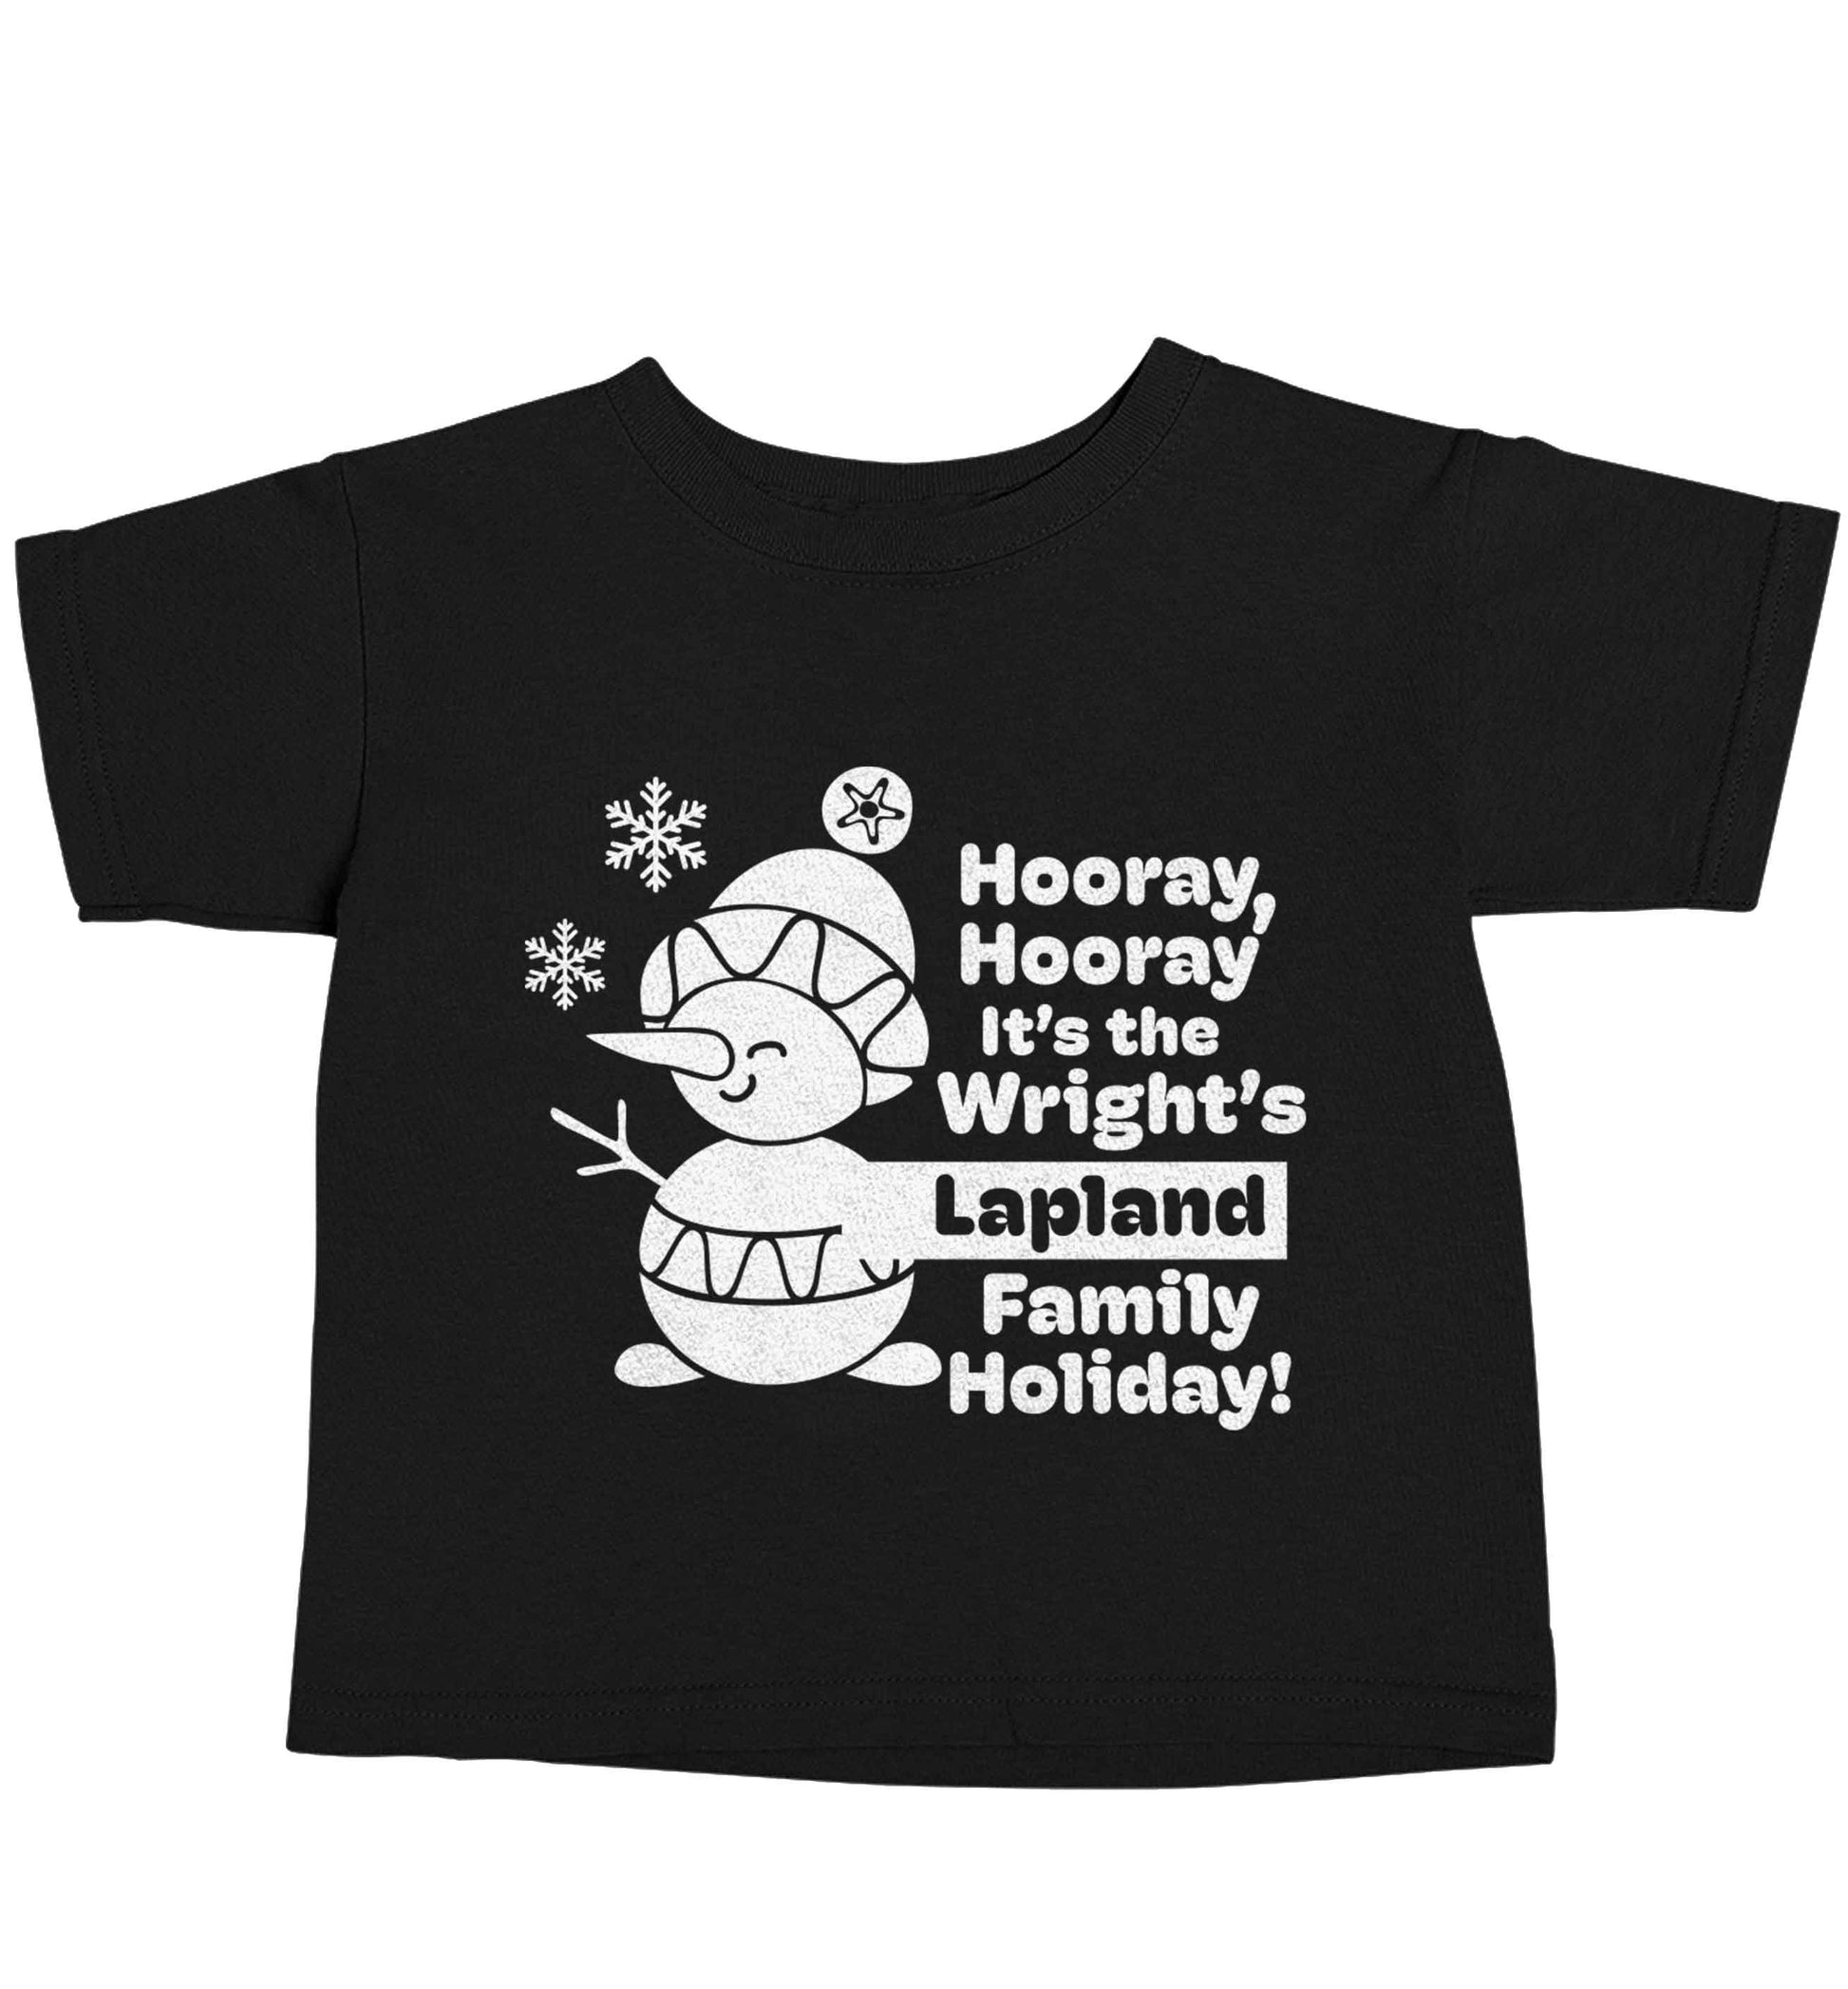 Hooray it's the personalised Lapland holiday! Black baby toddler Tshirt 2 years